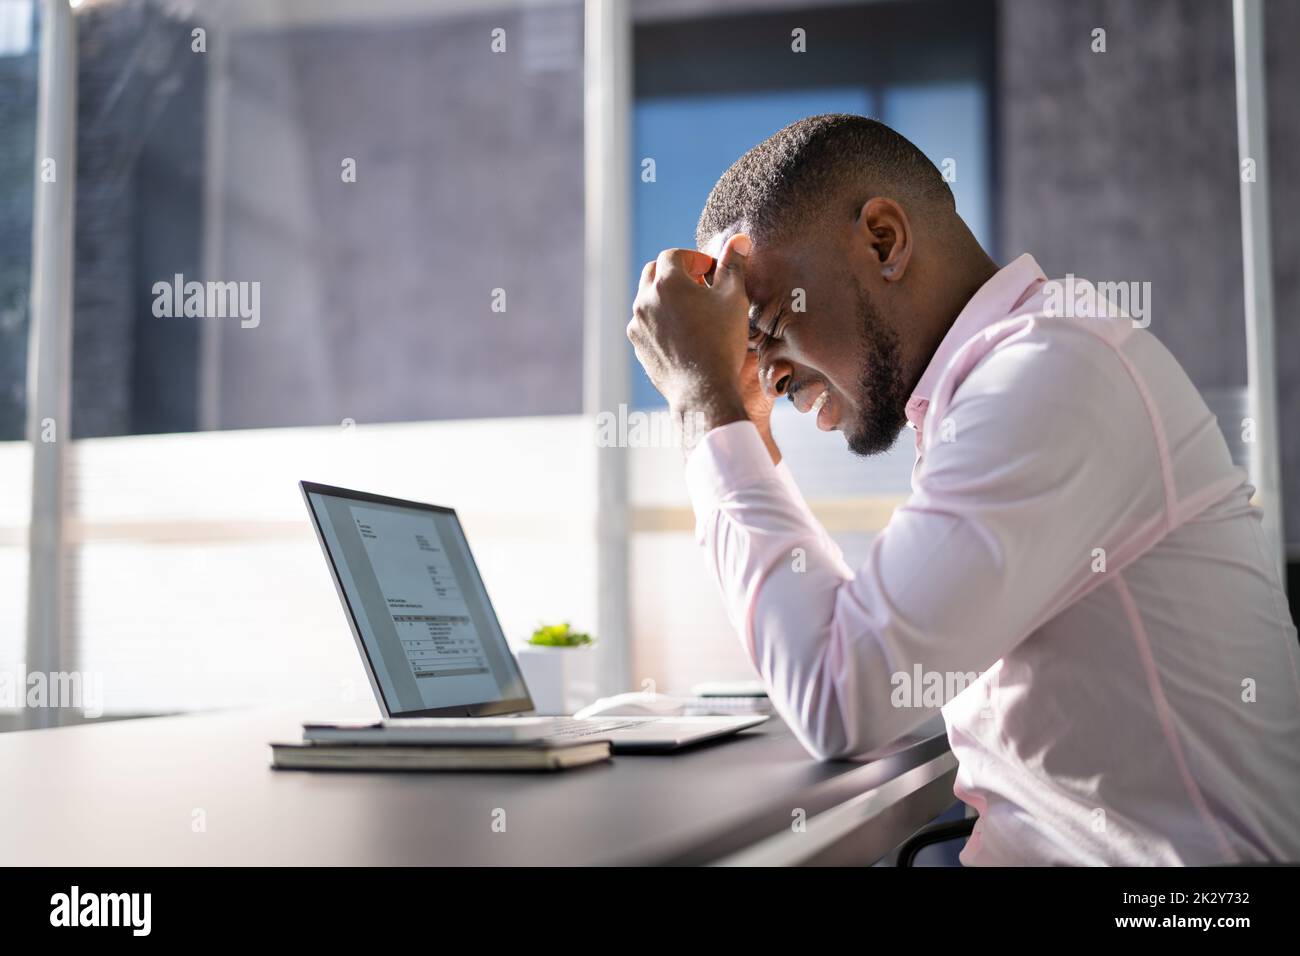 Stressed Sick African American Employee Man At Computer Stock Photo